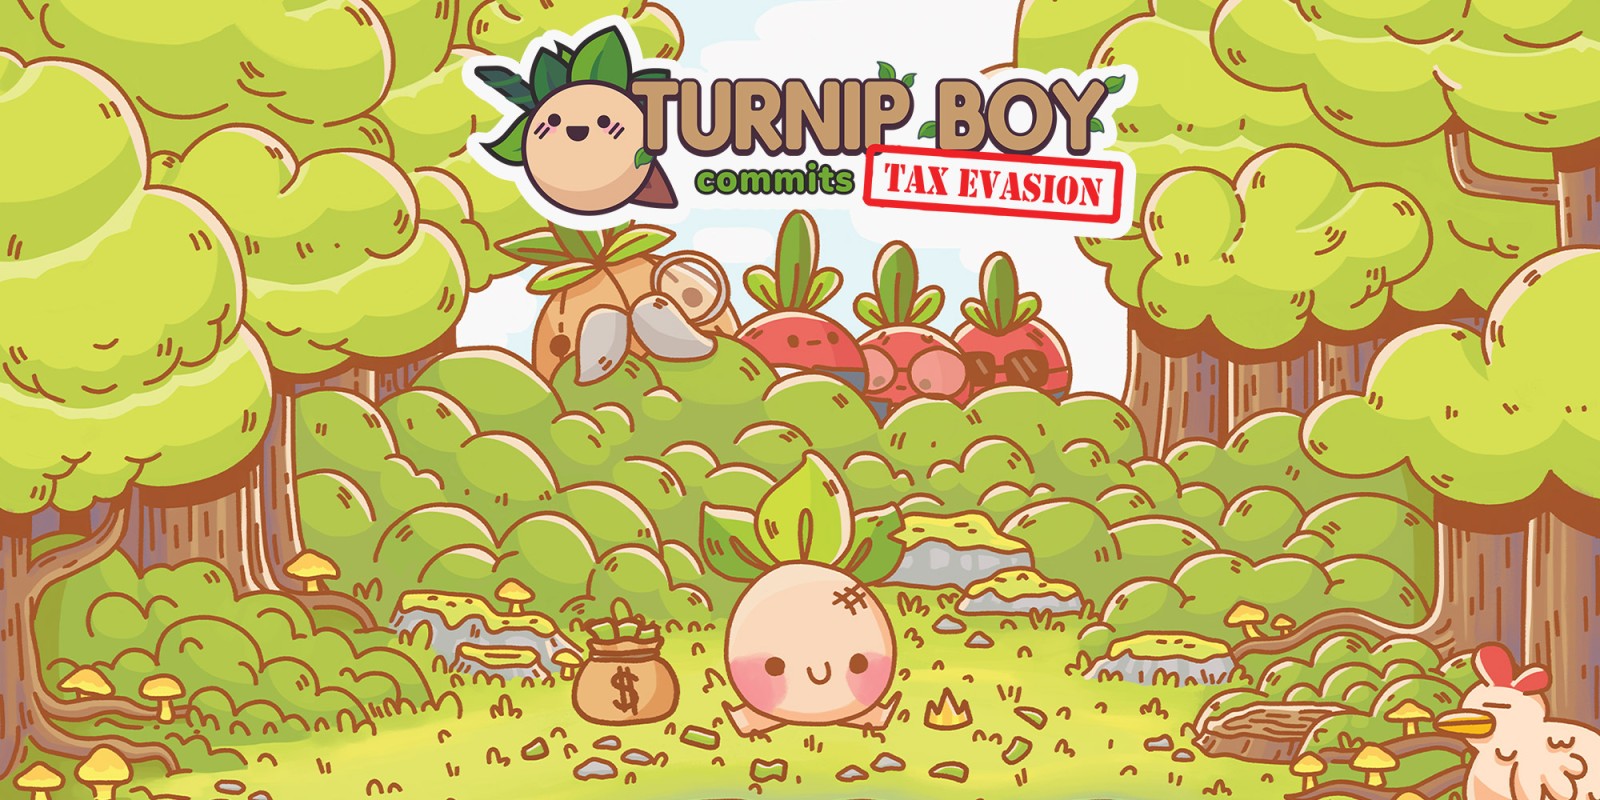 turnip boy commits tax evasion end song